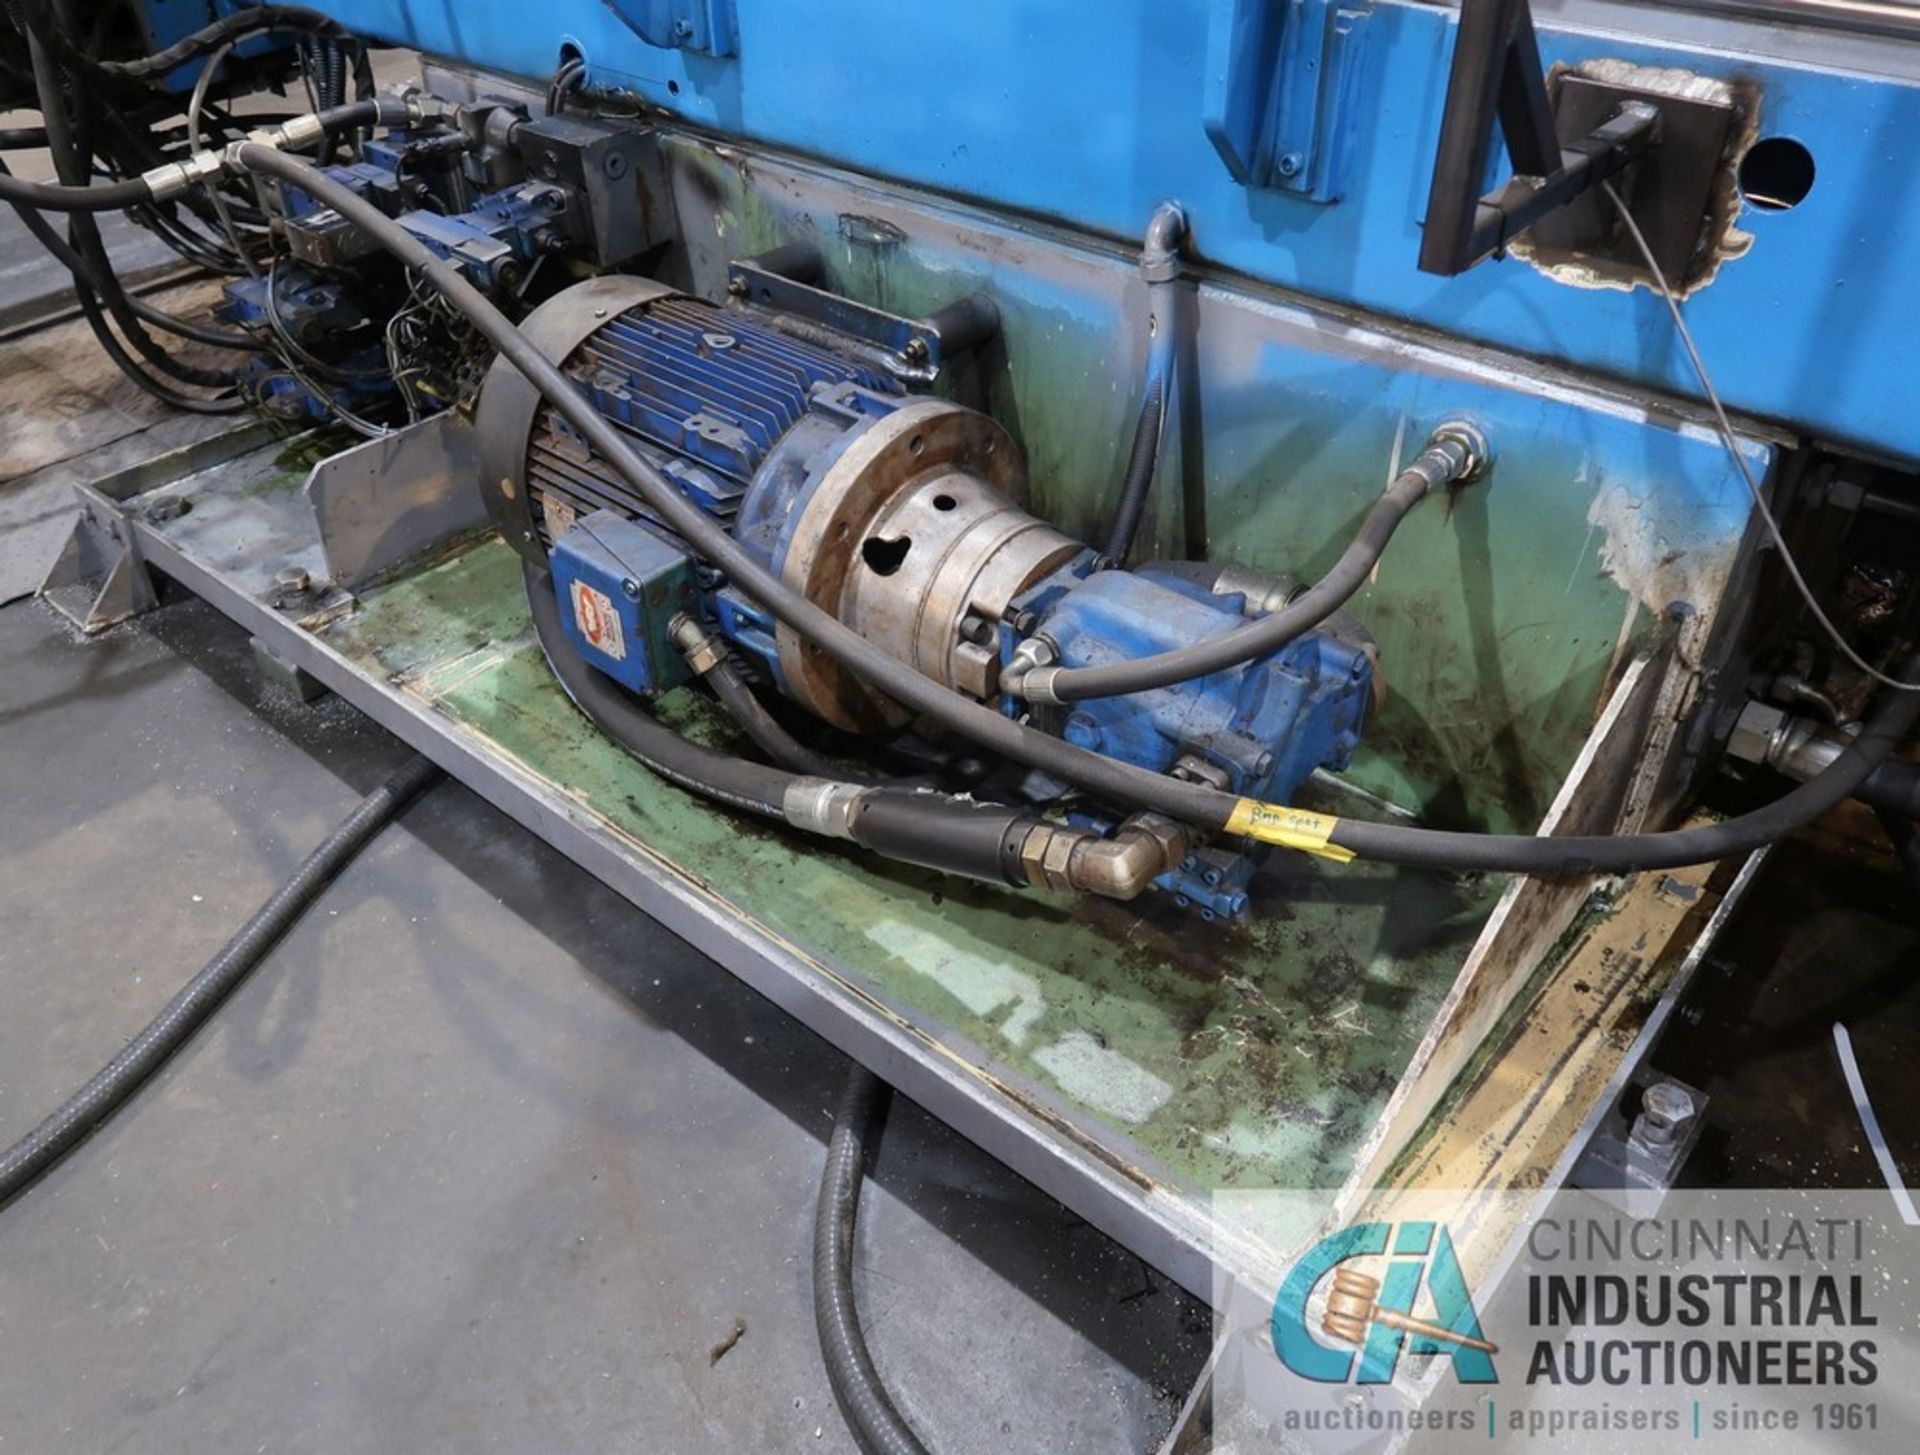 3" ADDISON MODEL DB76-TB TRAVELING BOOST CNC HYDRAULIC TUBE BENDER; S/N 10035, ASSET NO. ABCC-7, - Image 8 of 17